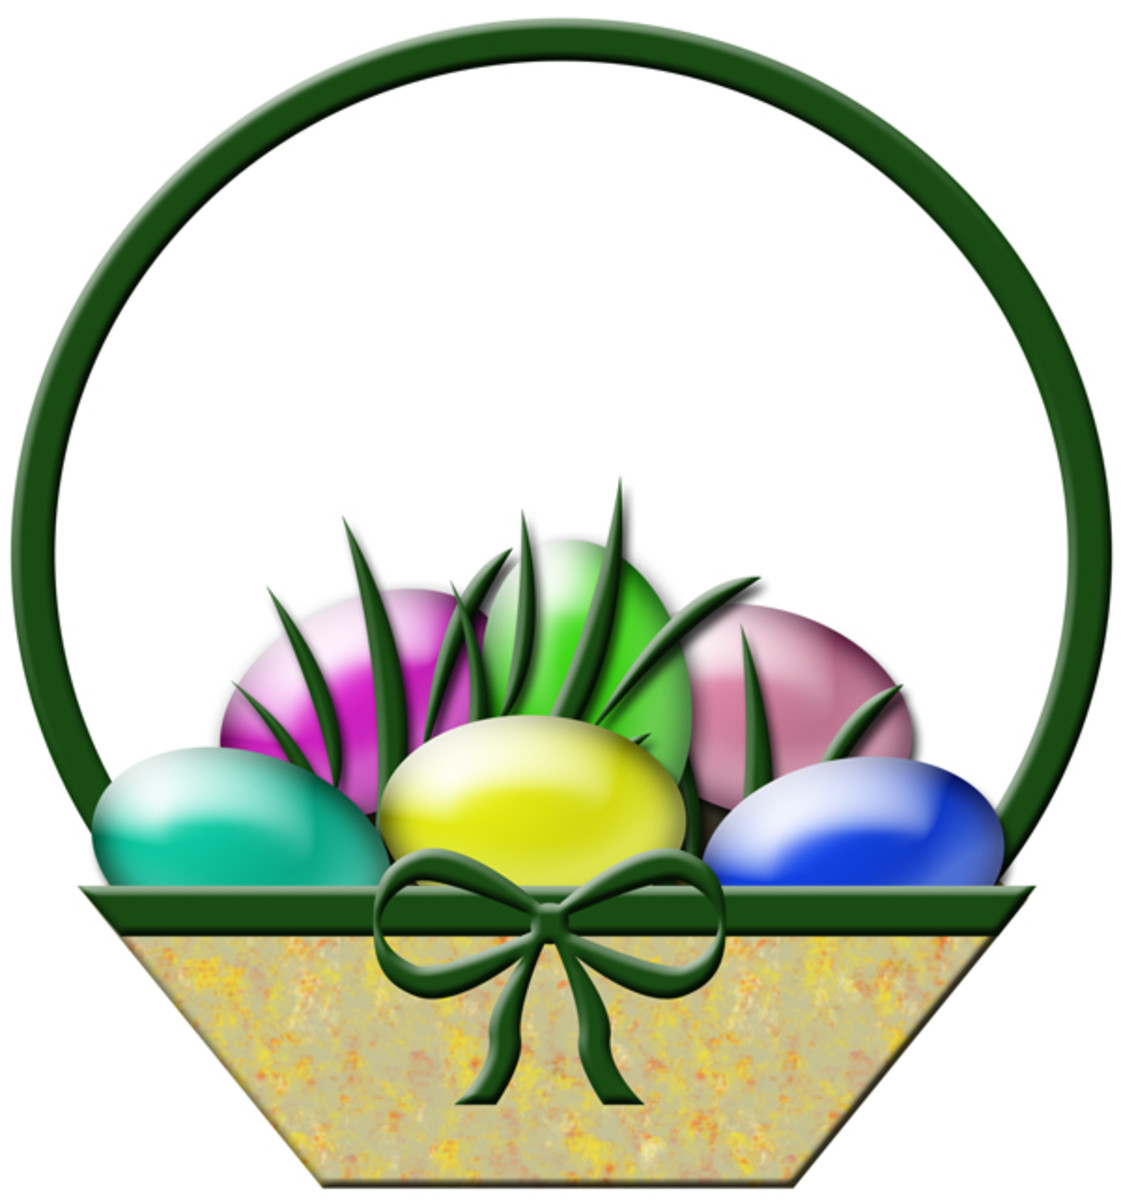 Free Easter Clip Art Images Crosses Bunnies Eggs Baskets More HubPages